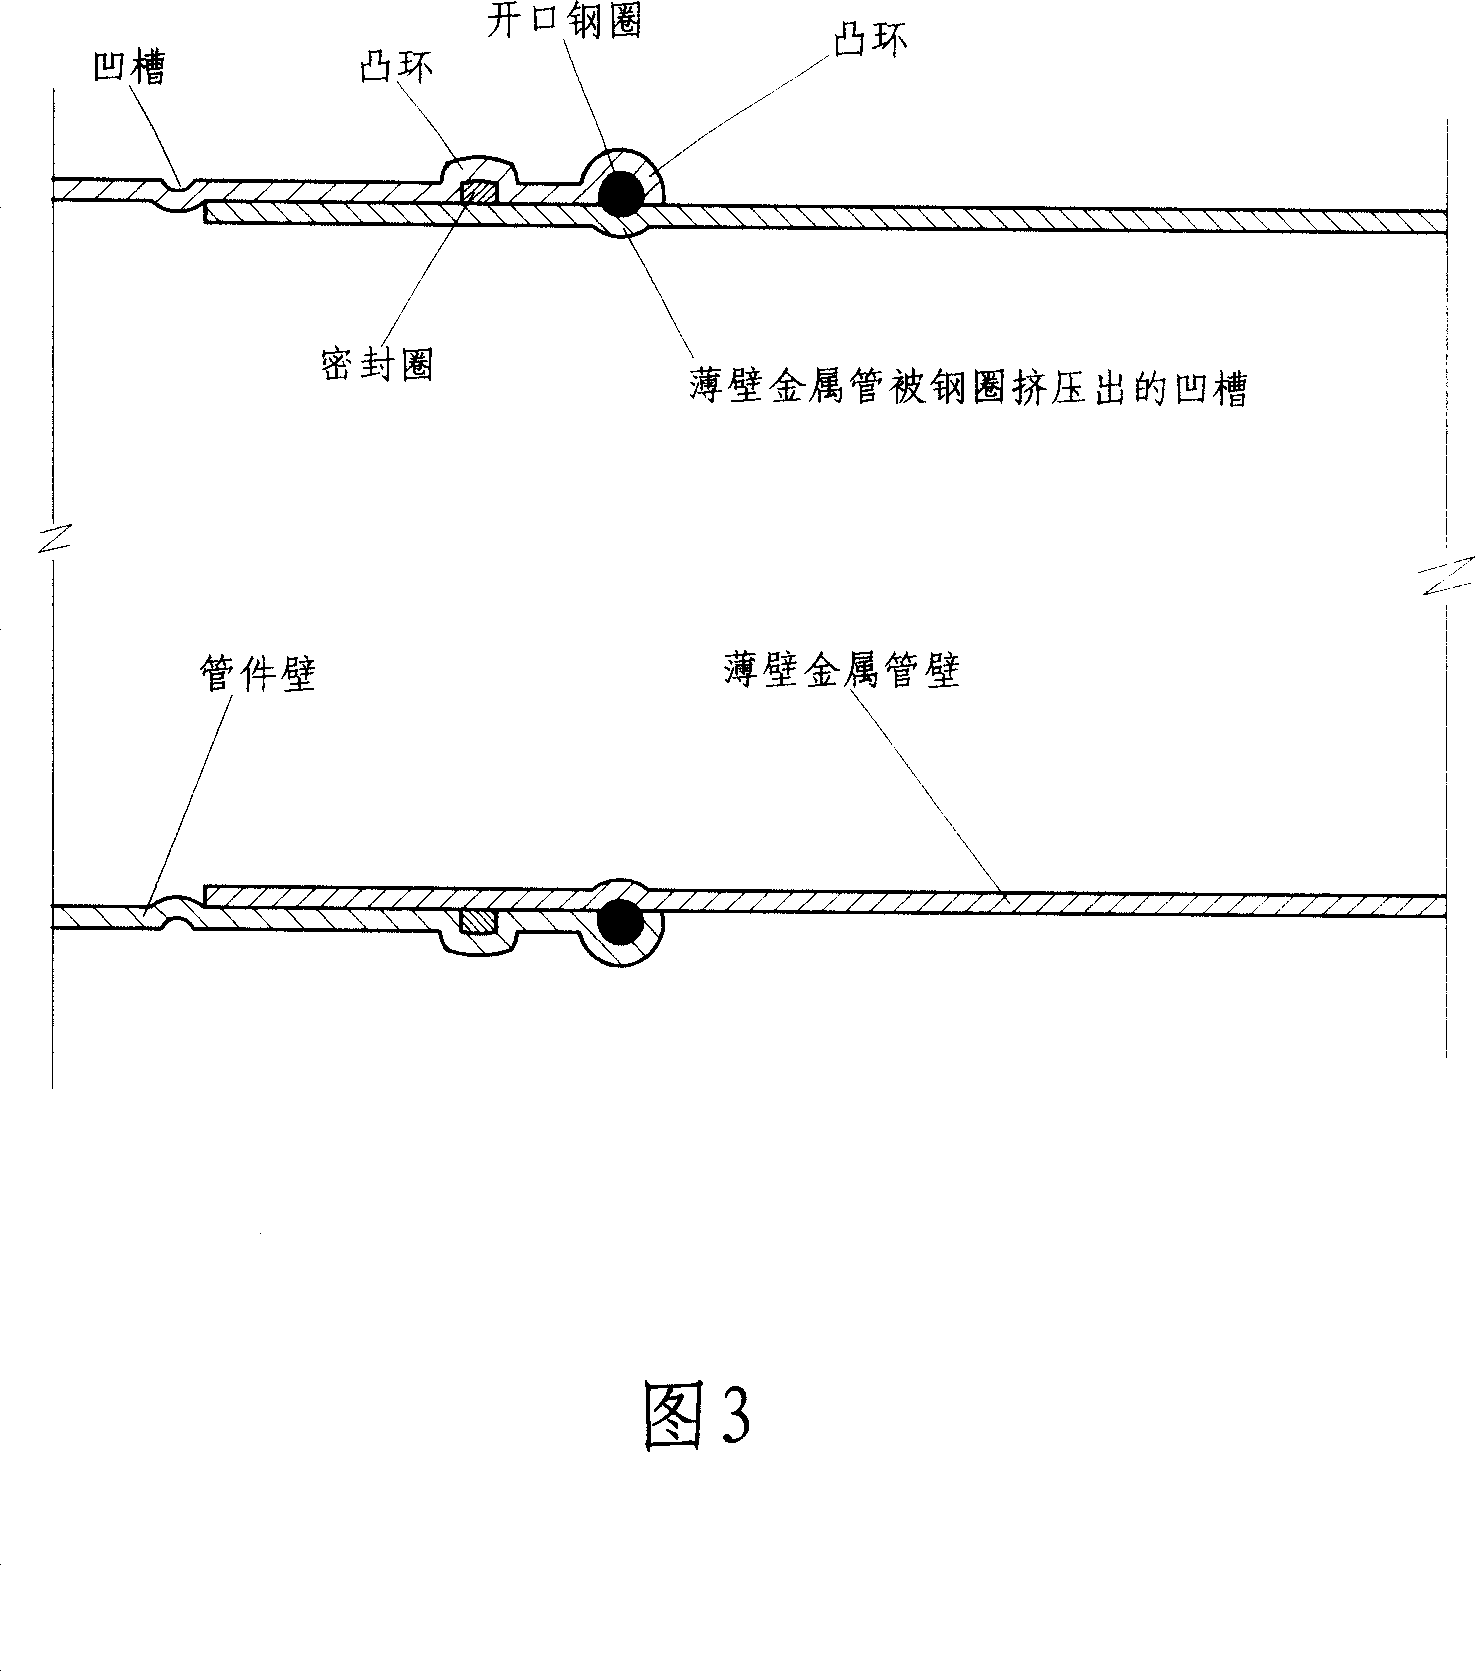 Clasp pipe fitting for connecting thin-wall metal pipe